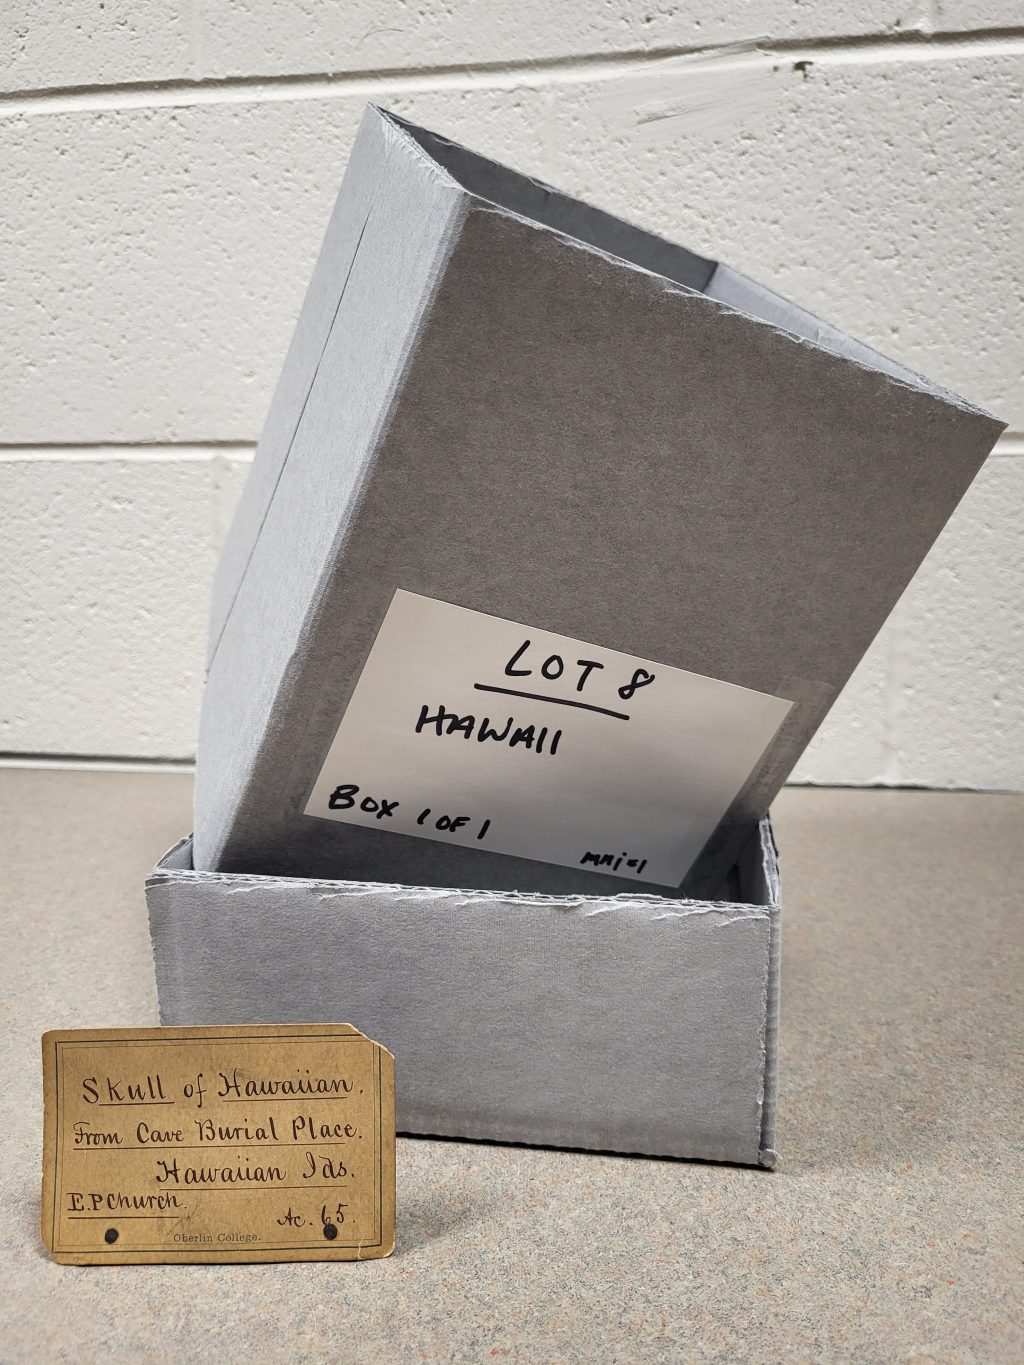 An archival box with "Lot 8 / Hawaii / Box 1 of 1" written on it, next to the label for the skull.